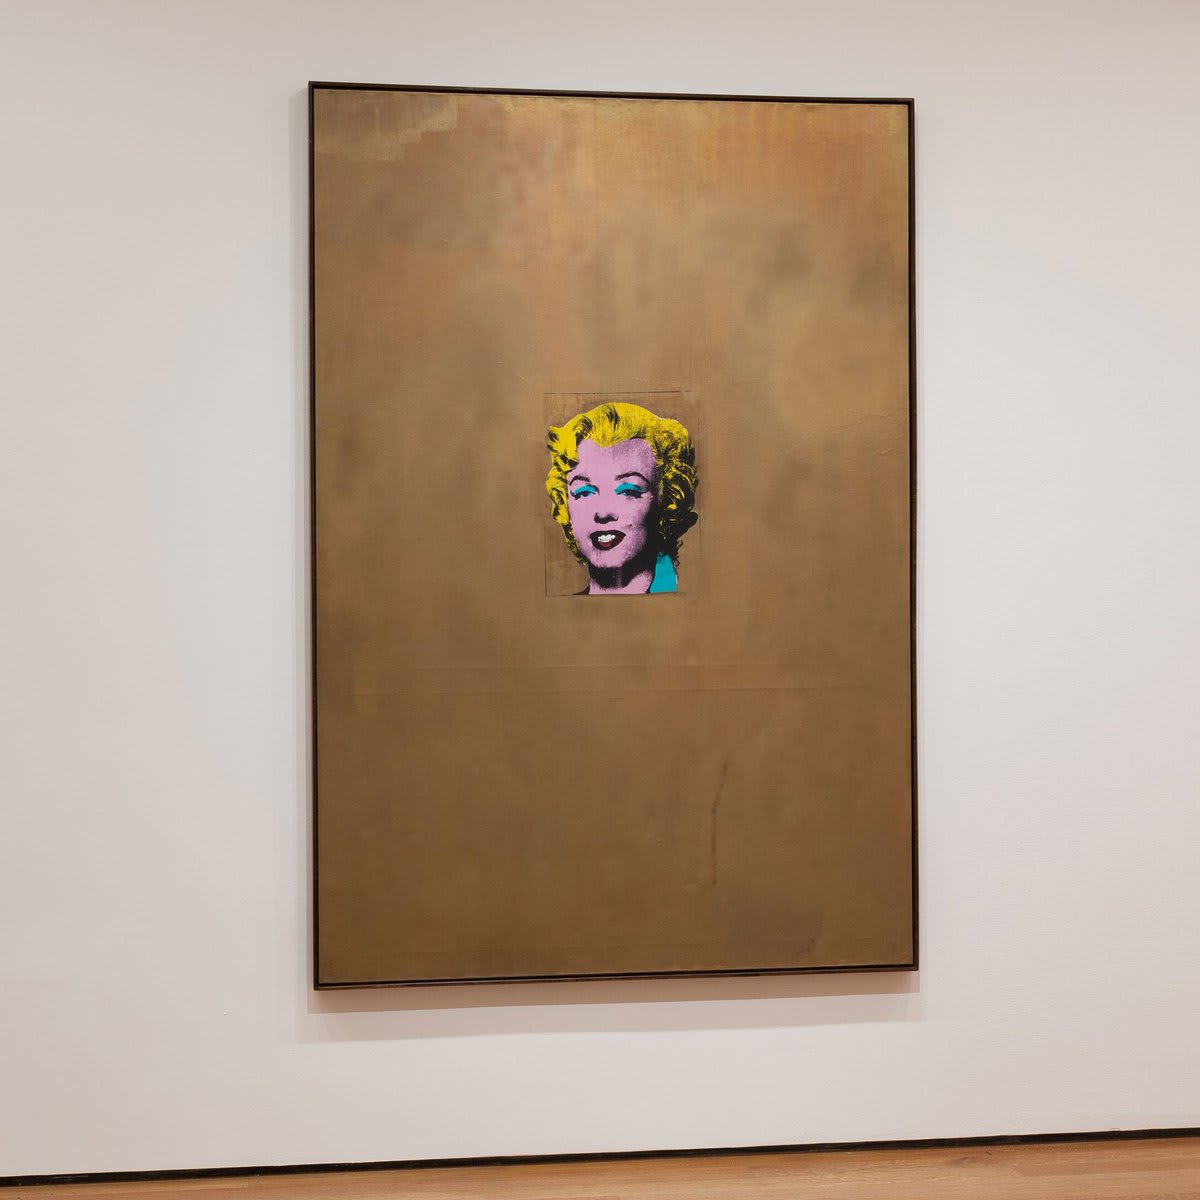 Andy Warhol was born otd in 1928! MoMACollection’s “Gold Marilyn Monroe” (1962), now on view, is one his first photo-silkscreened canvases and one of his earliest celebrity paintings: https://t.co/KQ91YVKkt4 What’s your favorite work by Warhol?